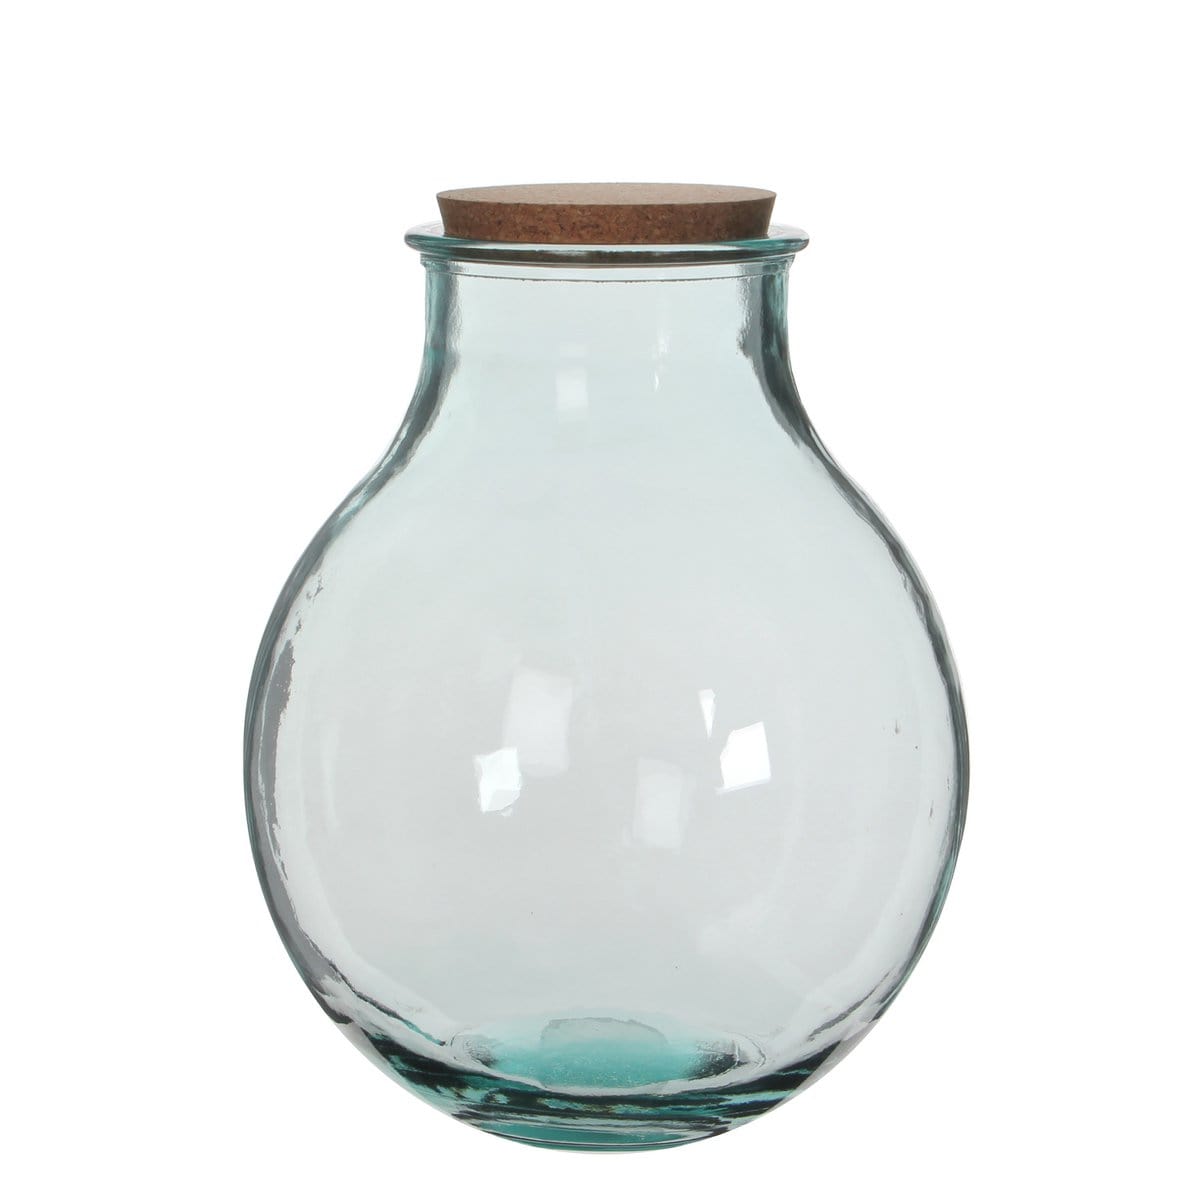 Mica Decorations Olly Vaas - H38 x Ø29 cm - Gerecycled Glas - Transparant